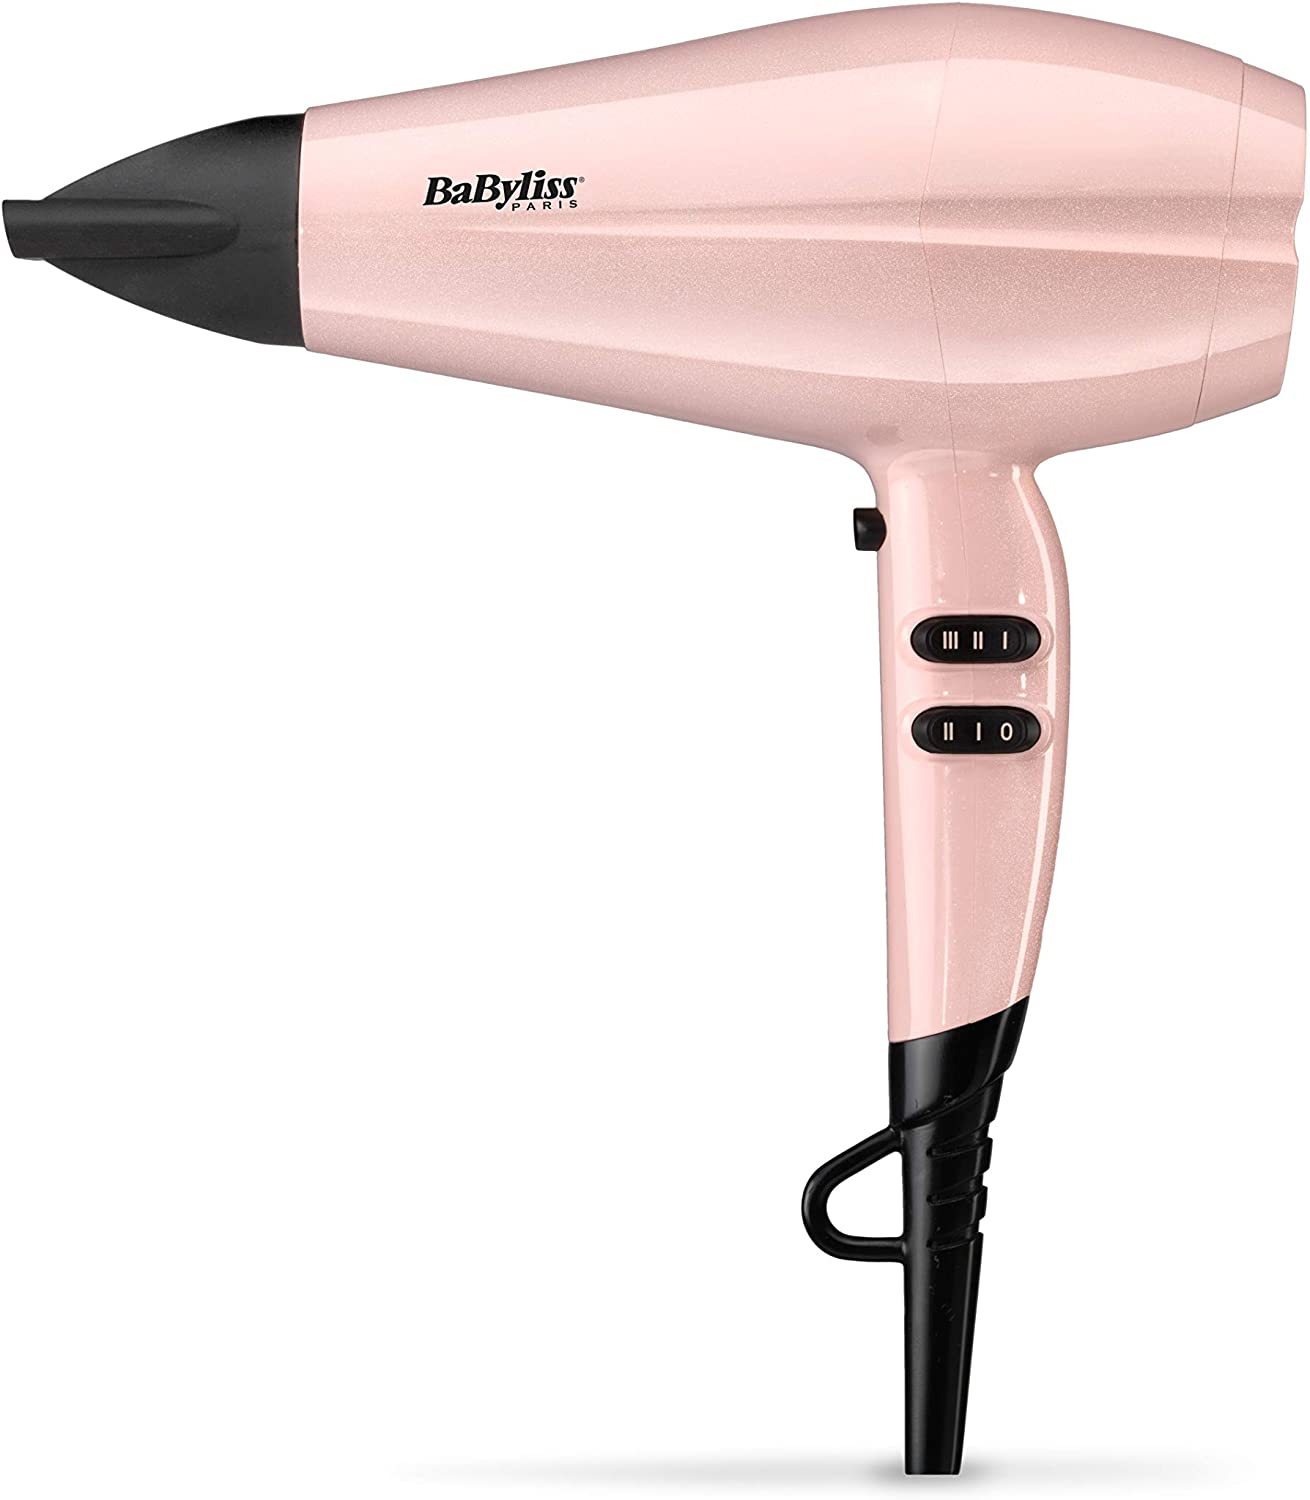 BaByliss 5337PRE Rose Blush 235 Hair Dryer, 2200W, DC Motor, Ionic, 2 Speeds and